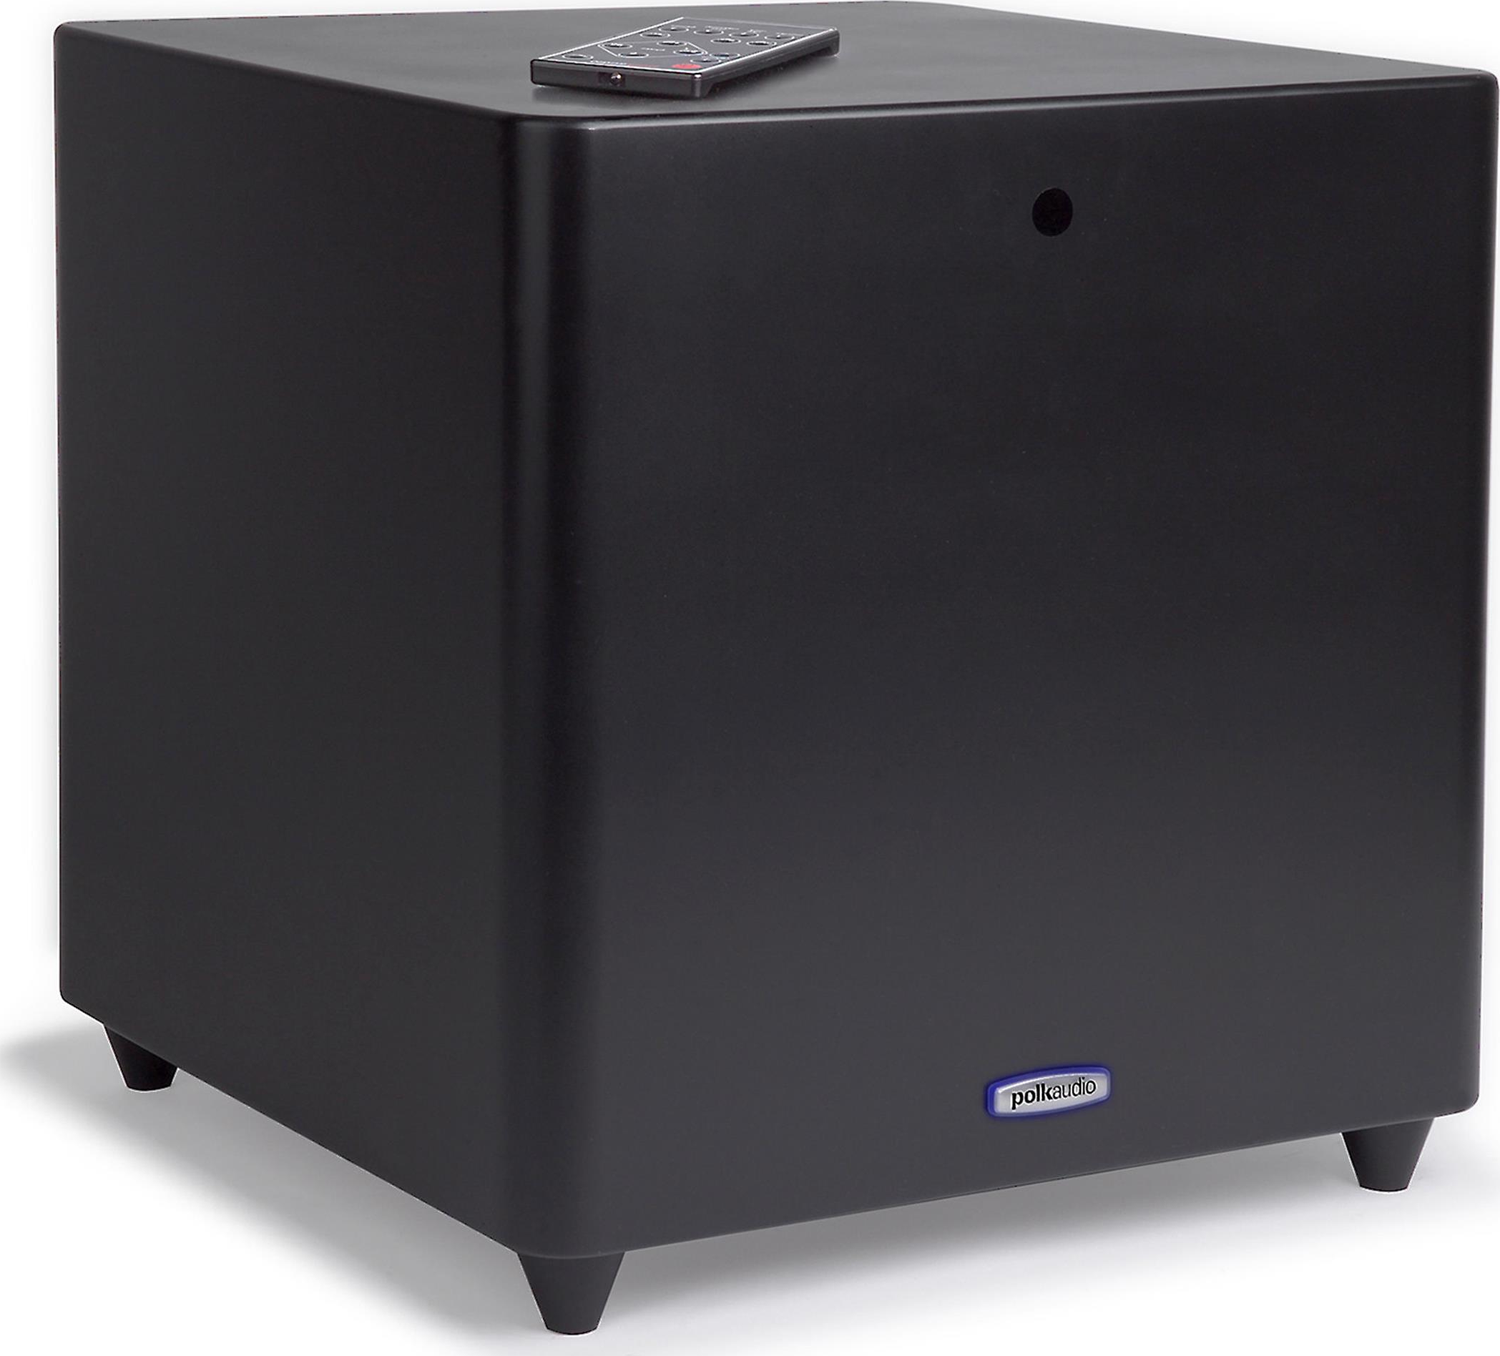 POLK AUDIO DSW Pro 660wi 12" 400 Powered Subwoofer | Accessories4less